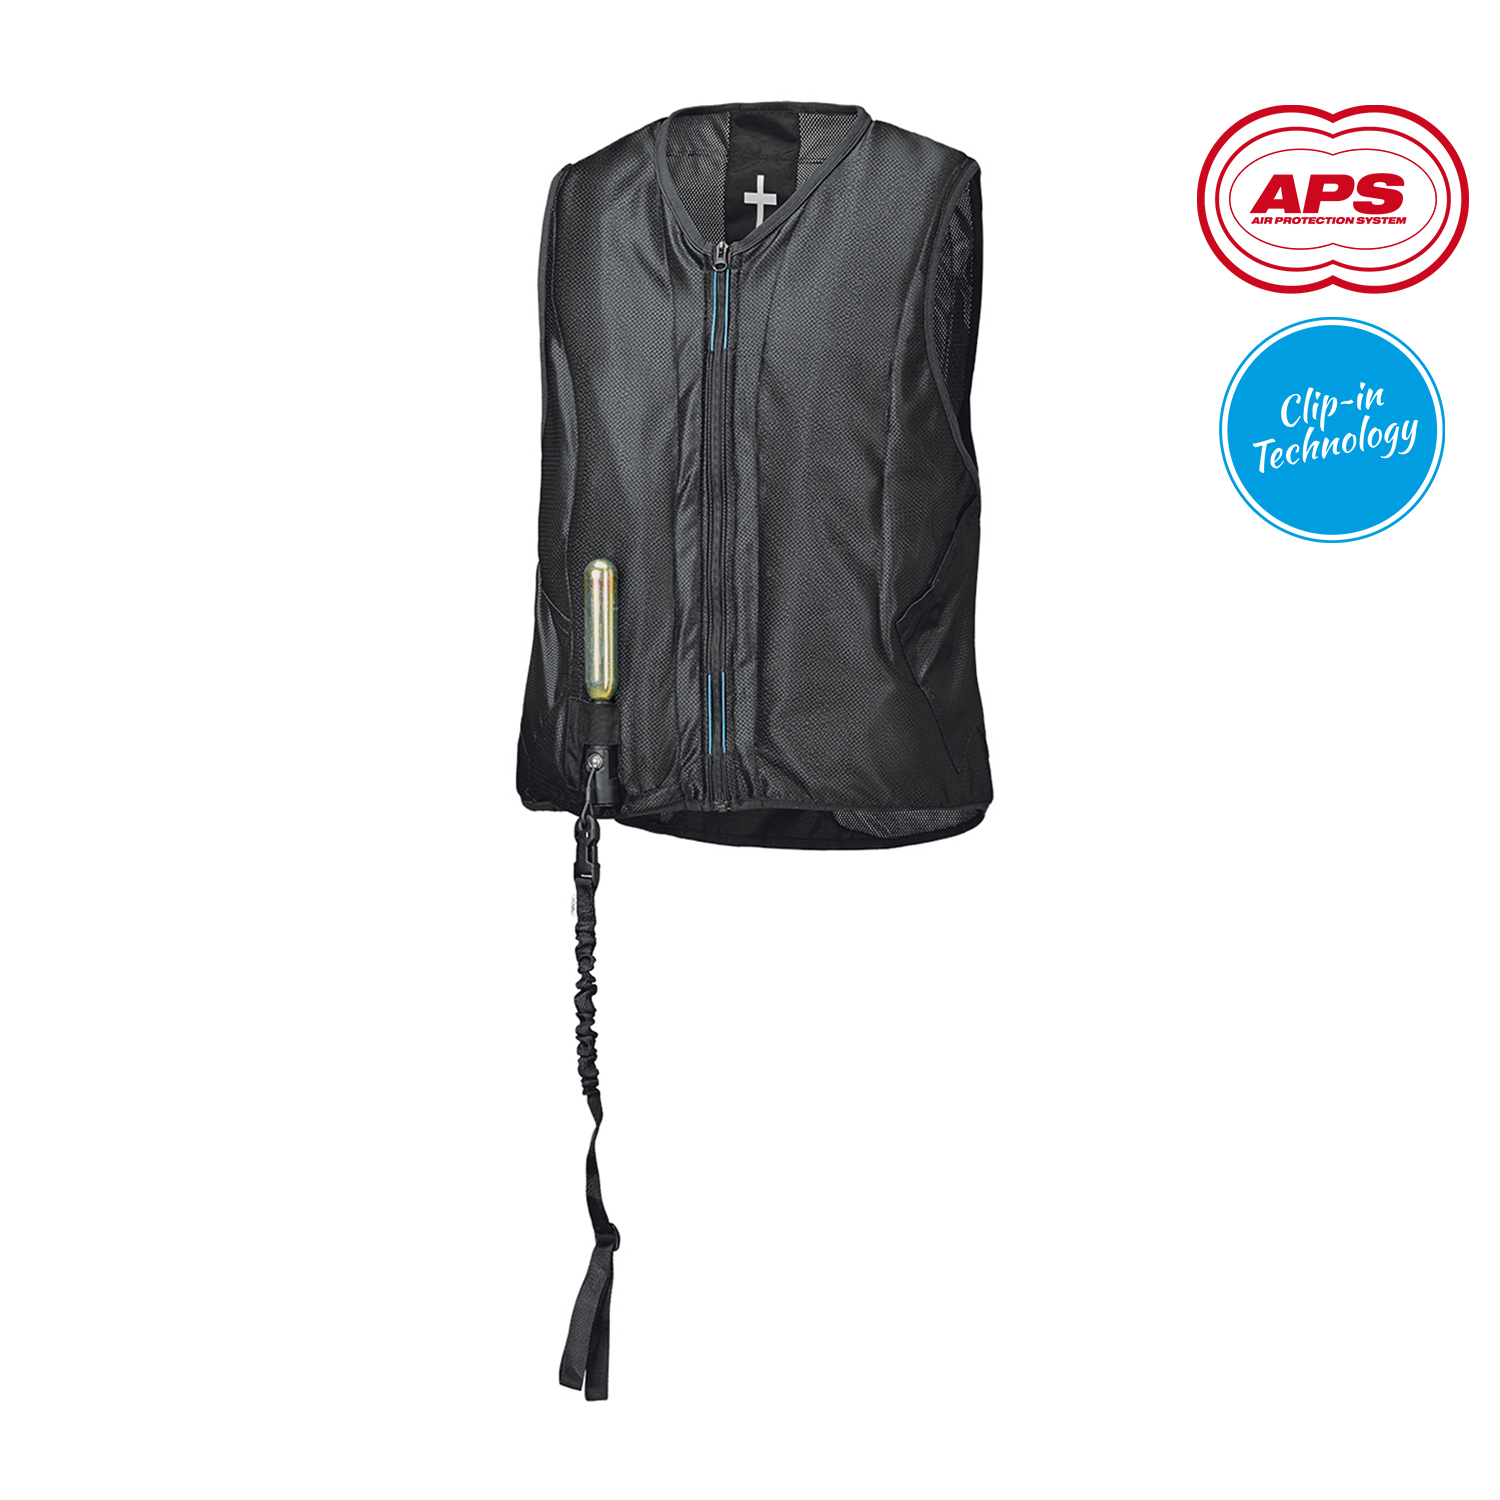 Held Clip-in Air Vest APS - Available in Various Sizes